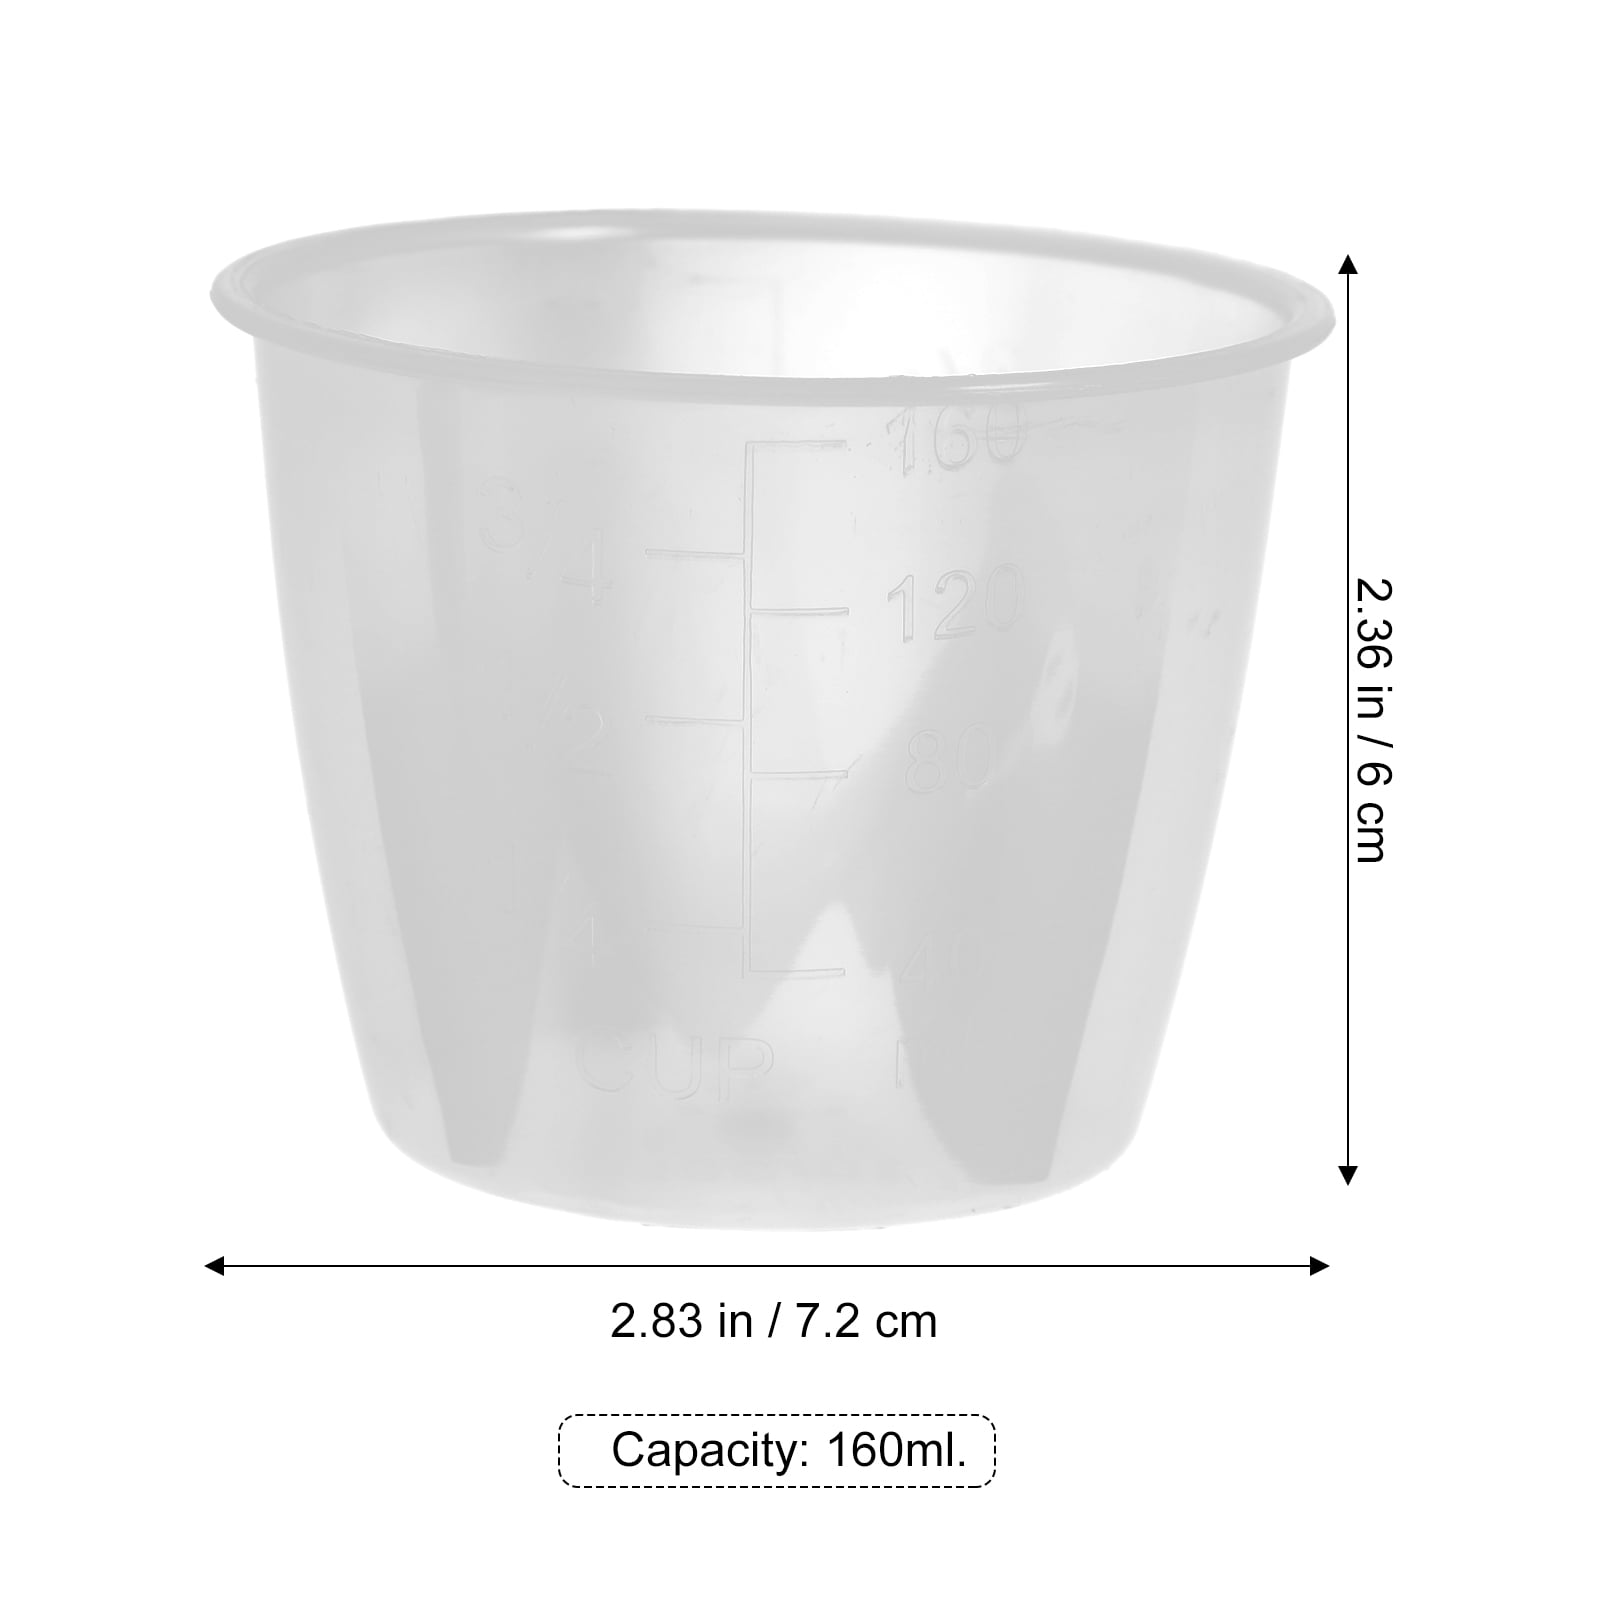 Warkul Practical Food-grade Measuring Cup Clear Scale Precise Plastic  Measuring Jar for Baking